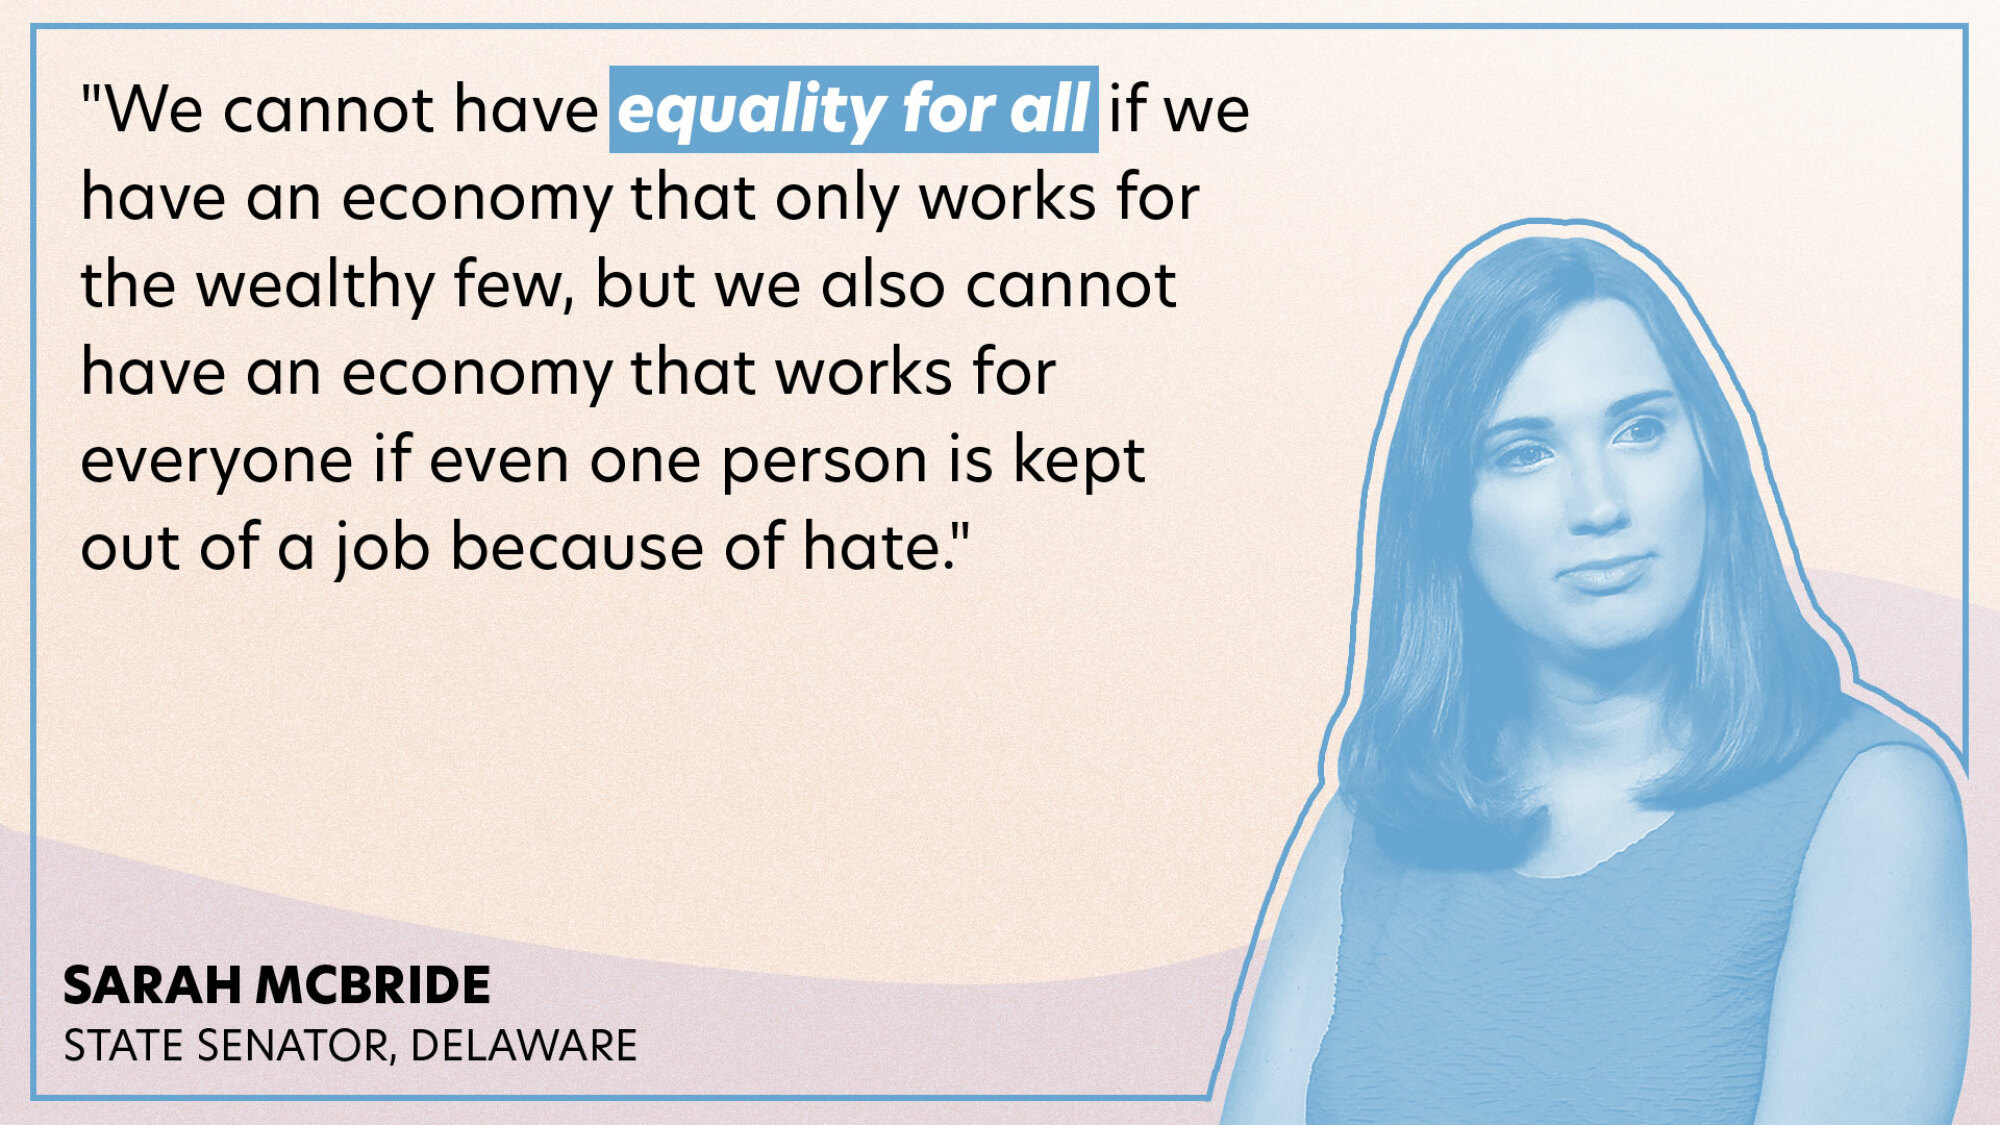 "We cannot have equality for all if we have an economy that only works for the wealthy few, but we also cannot have an economy that works for everyone if even one person is kept out of a job because of hate."